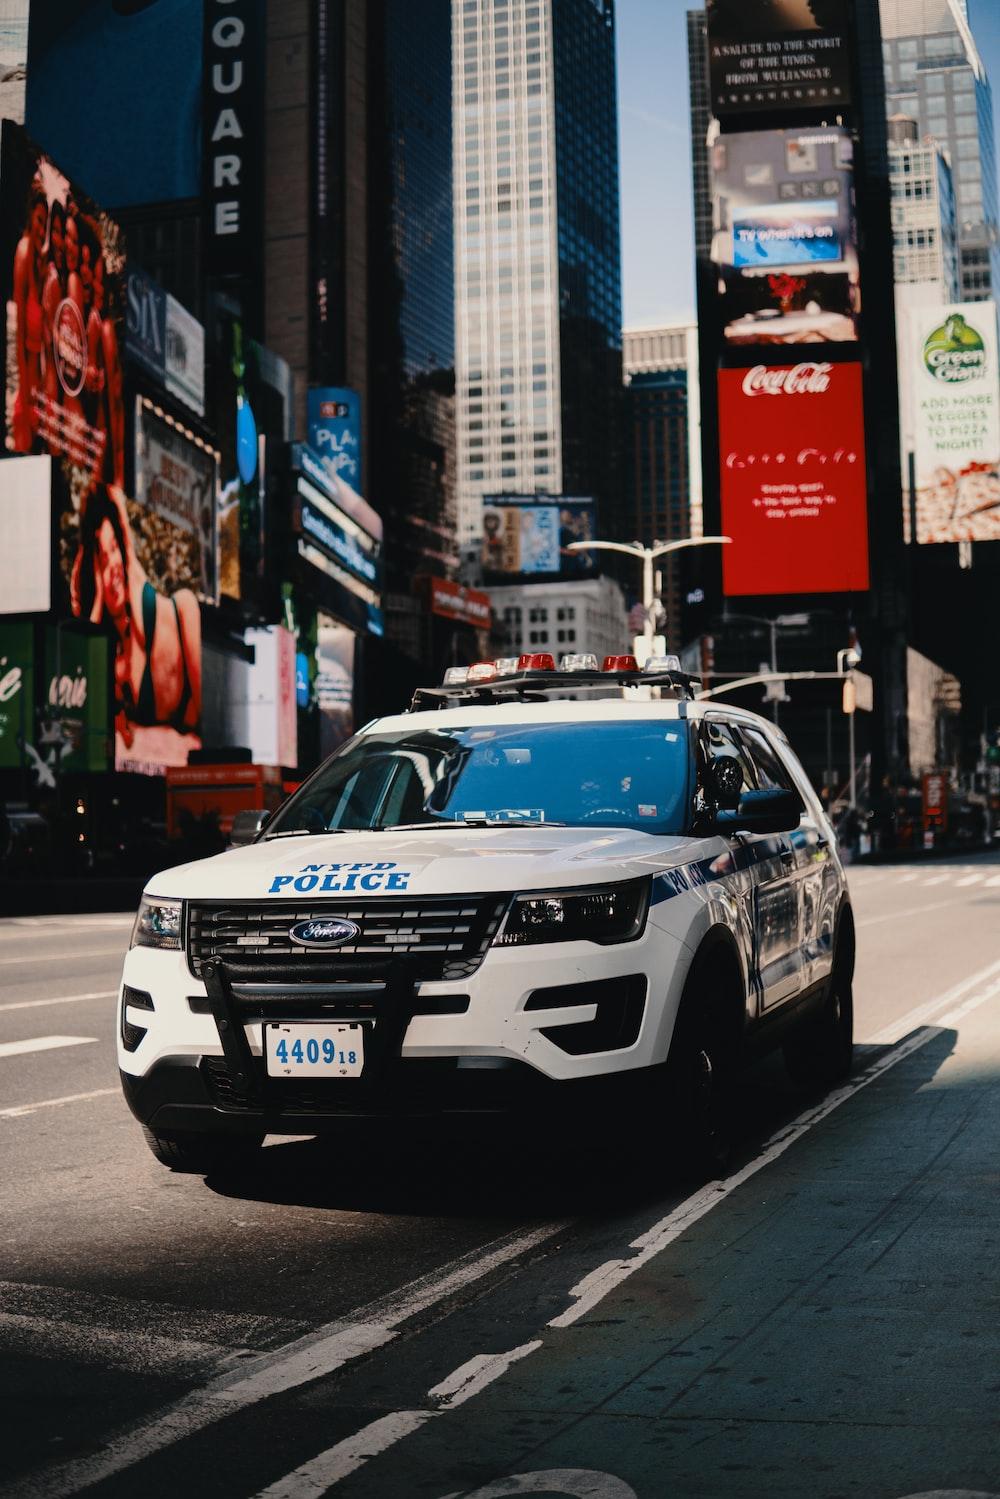 1000 Police Car Pictures Download Free Images on